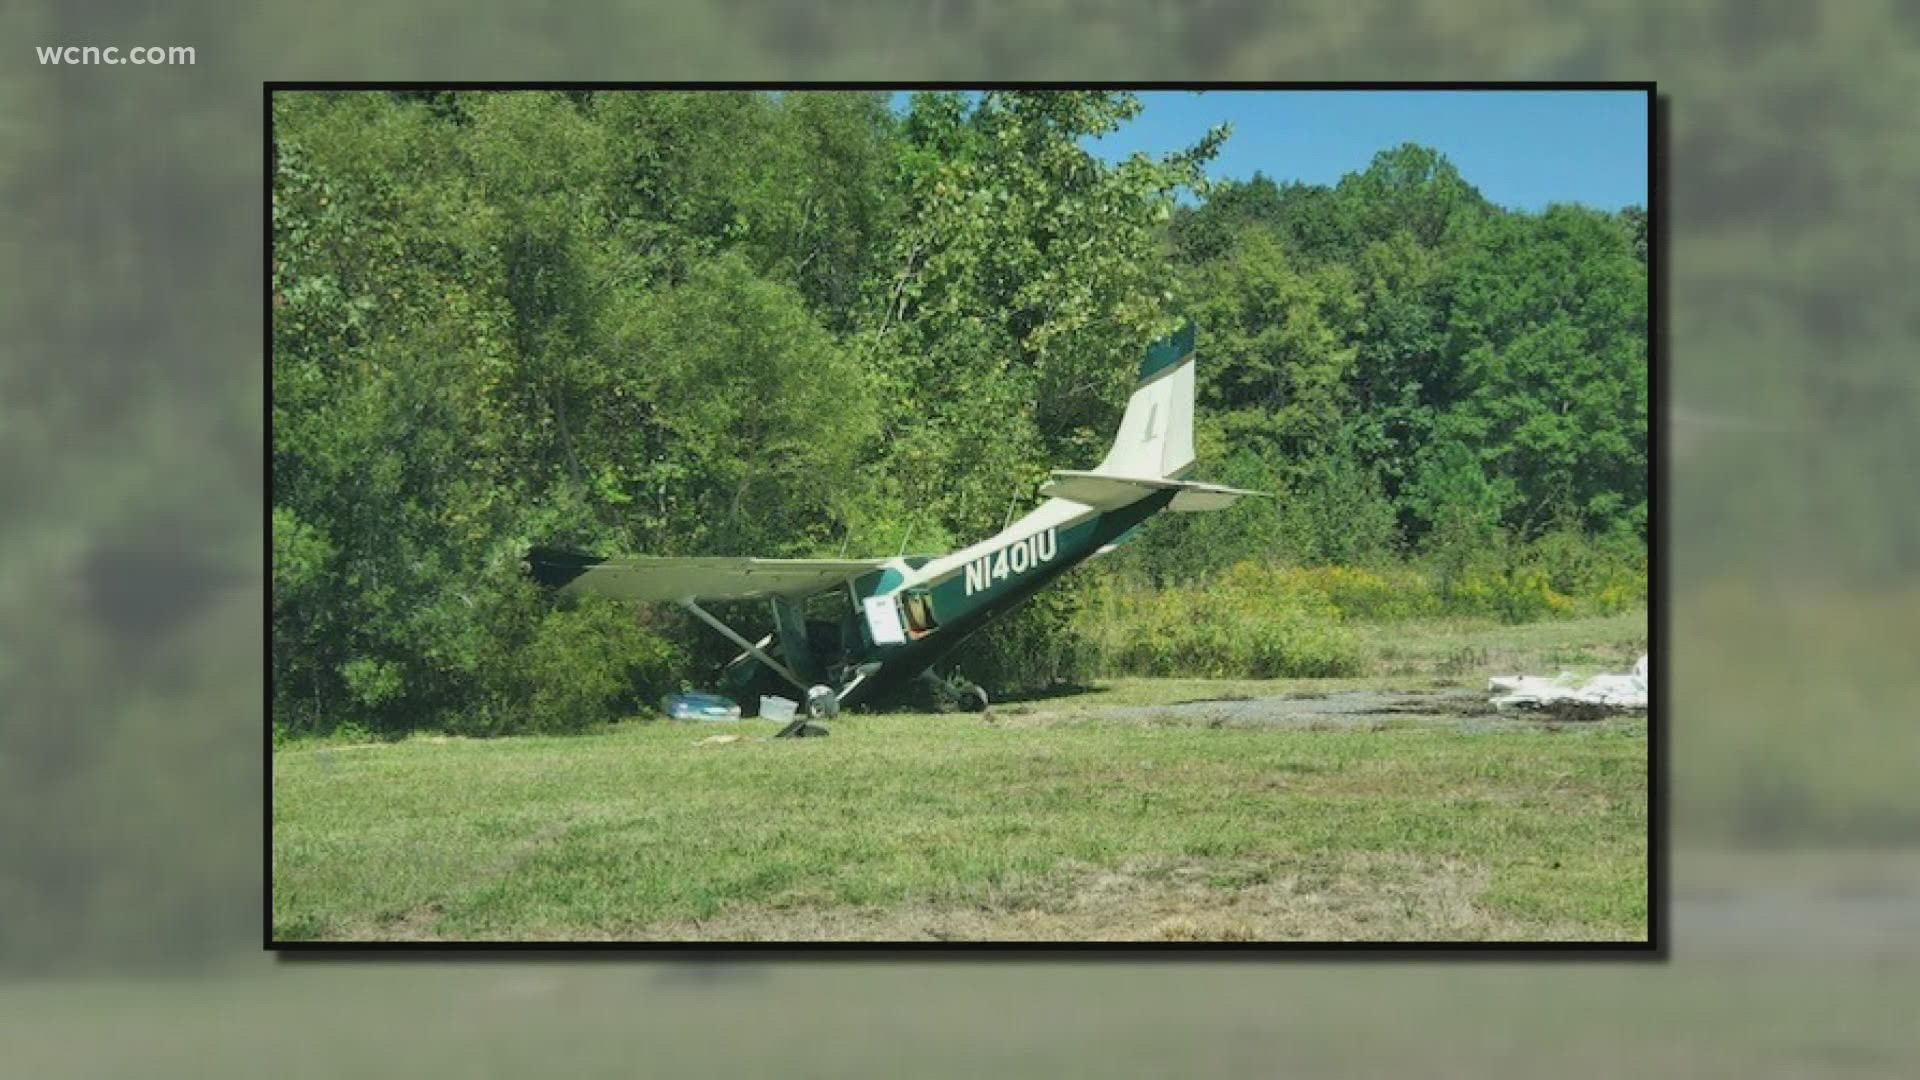 Deputies said the pilot was trying to take off when it happened. The pilot was the only person on board and had minor injuries as a result of the crash.